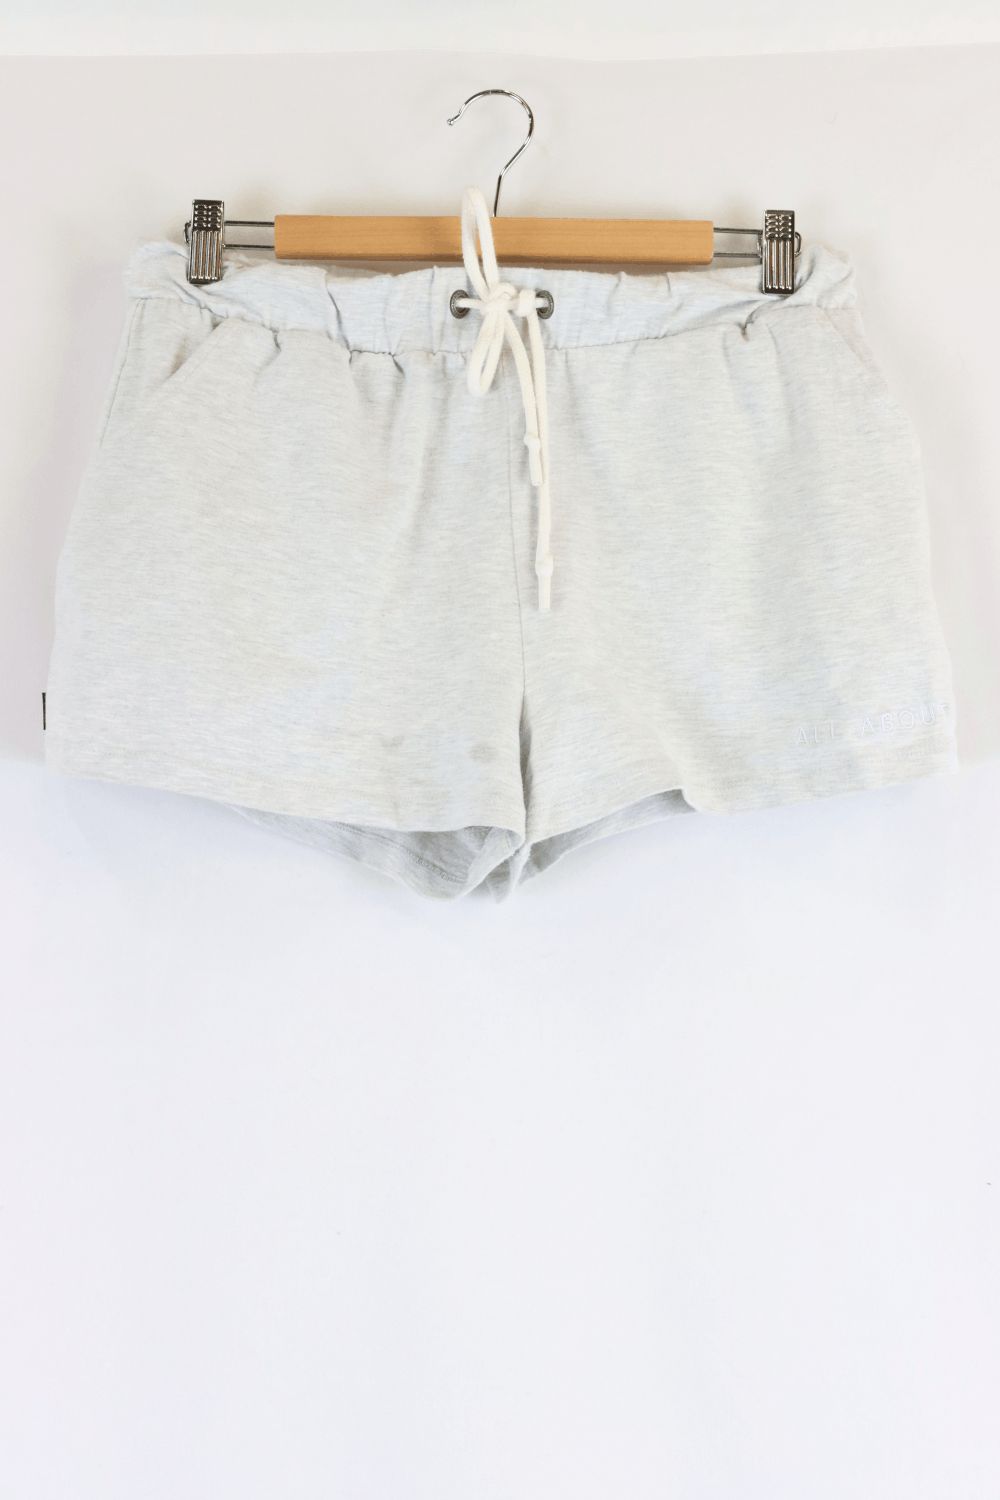 All About Eve Grey Shorts 10